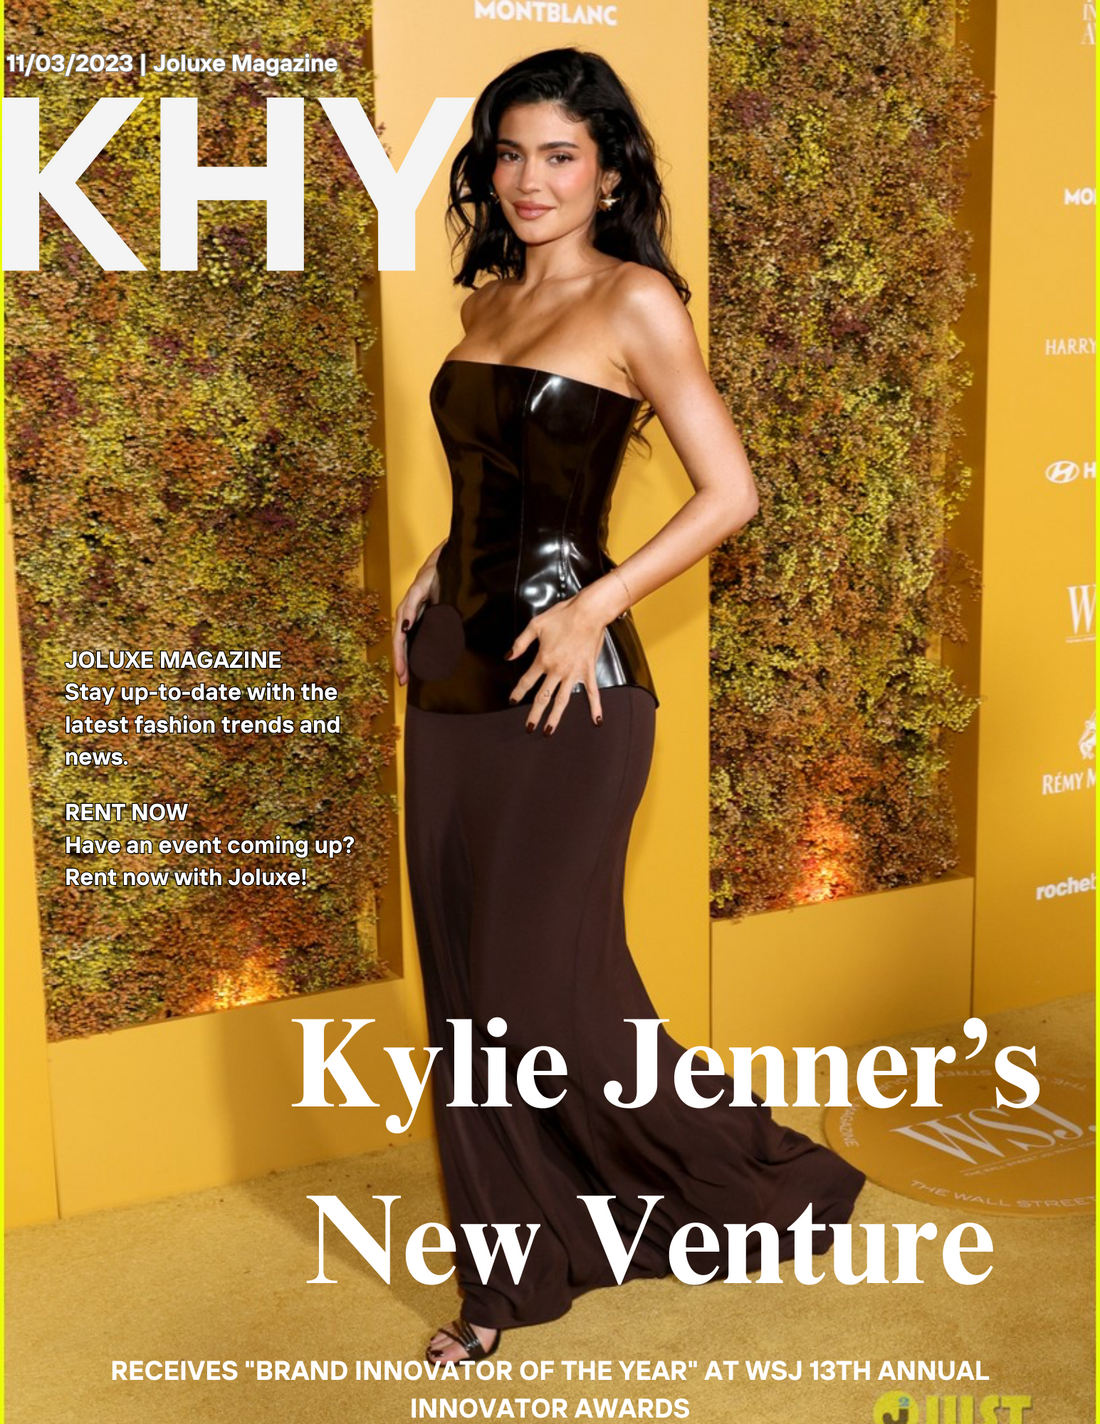 Kylie Jenner Is Coming for Fashion - WSJ